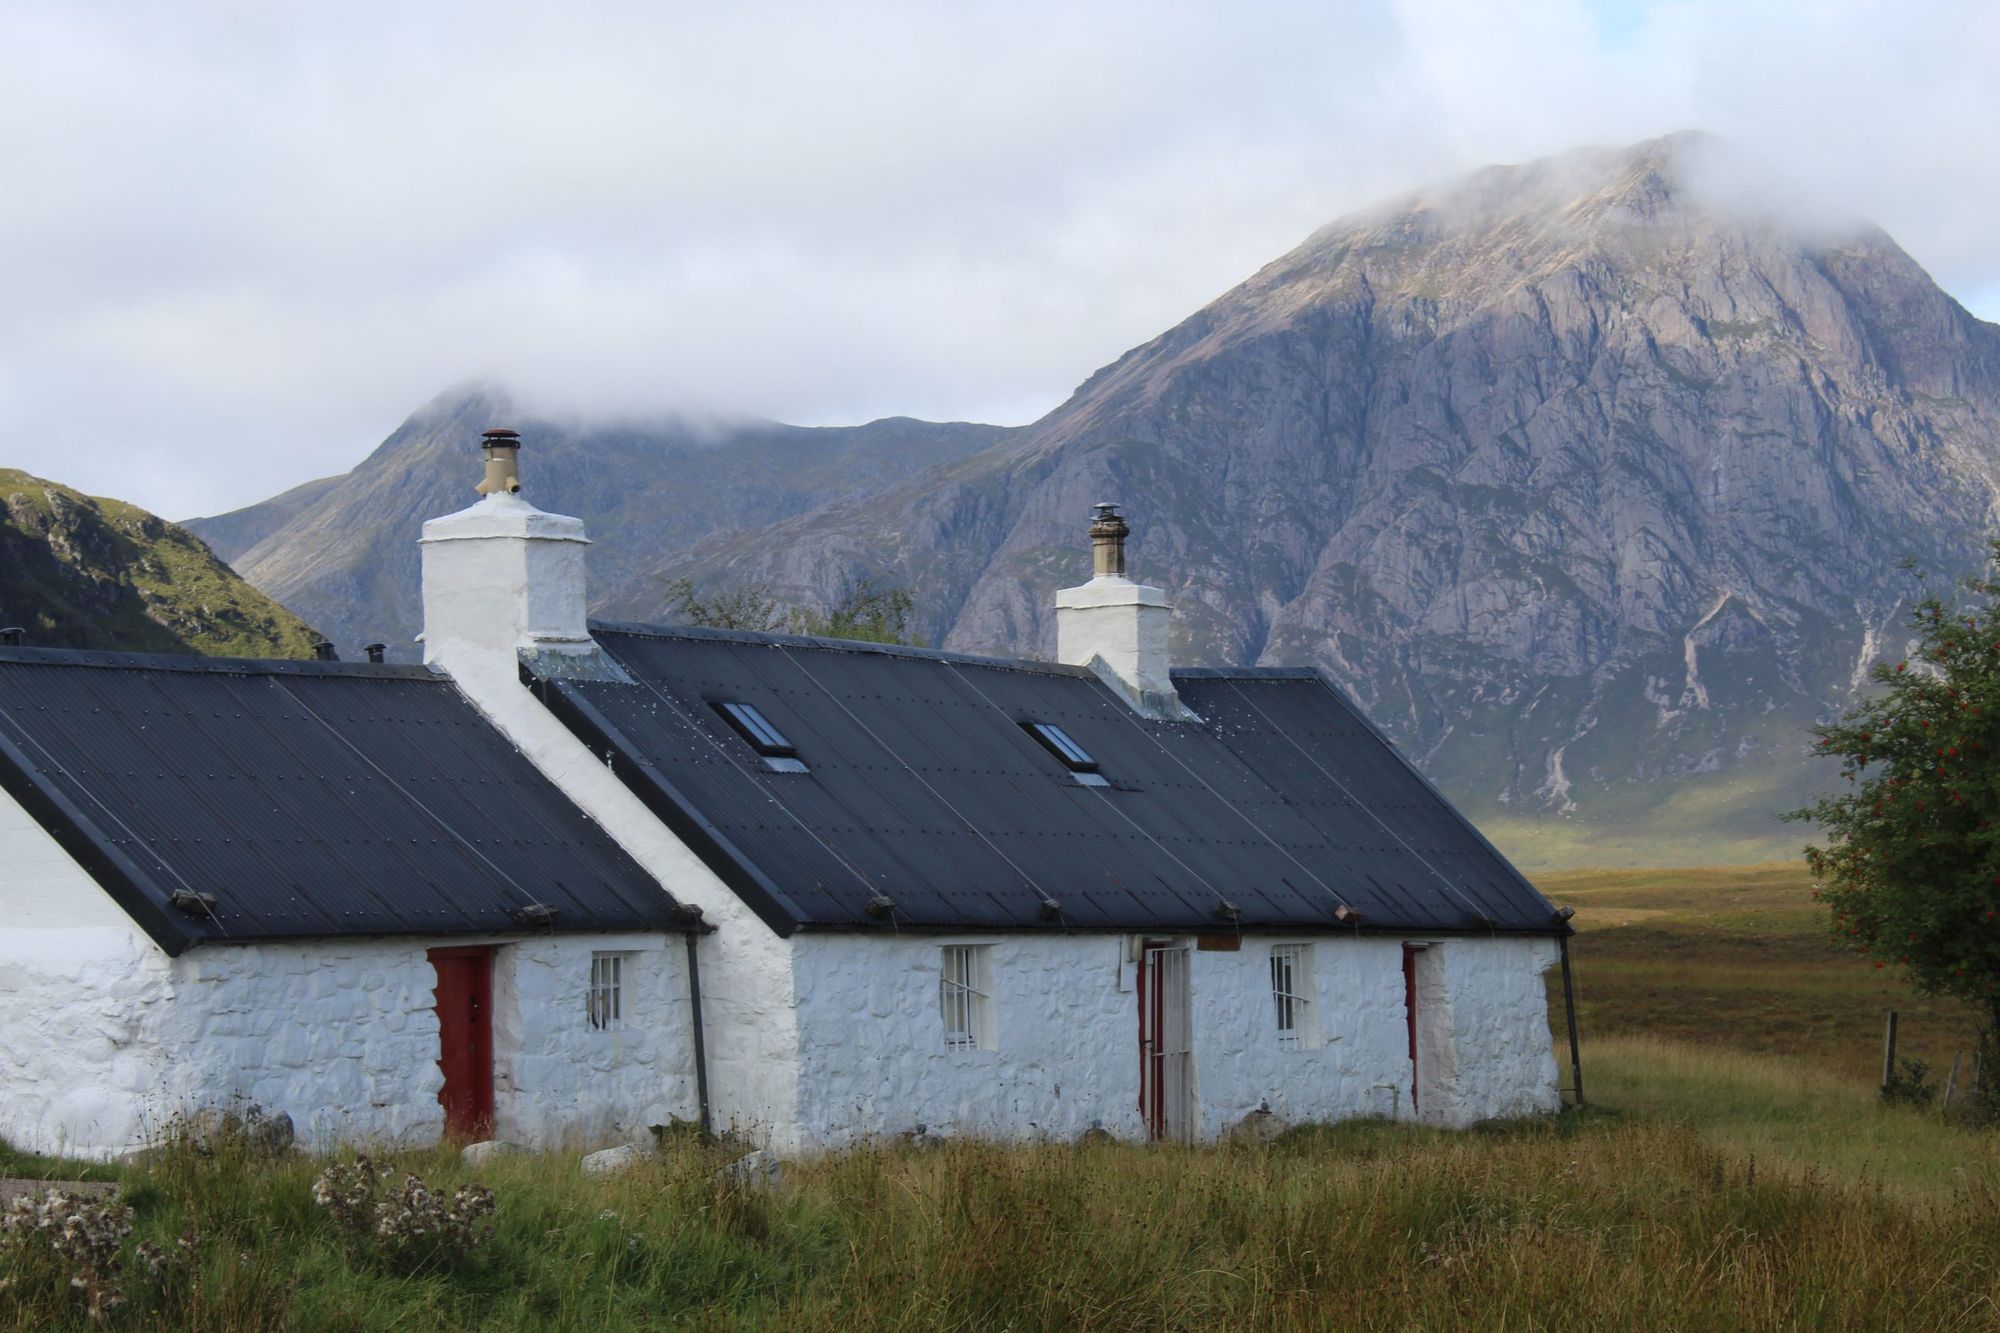 Blackrock Cottage is in the foreground, and the mountain of Buachaille Etive Mòr in the background